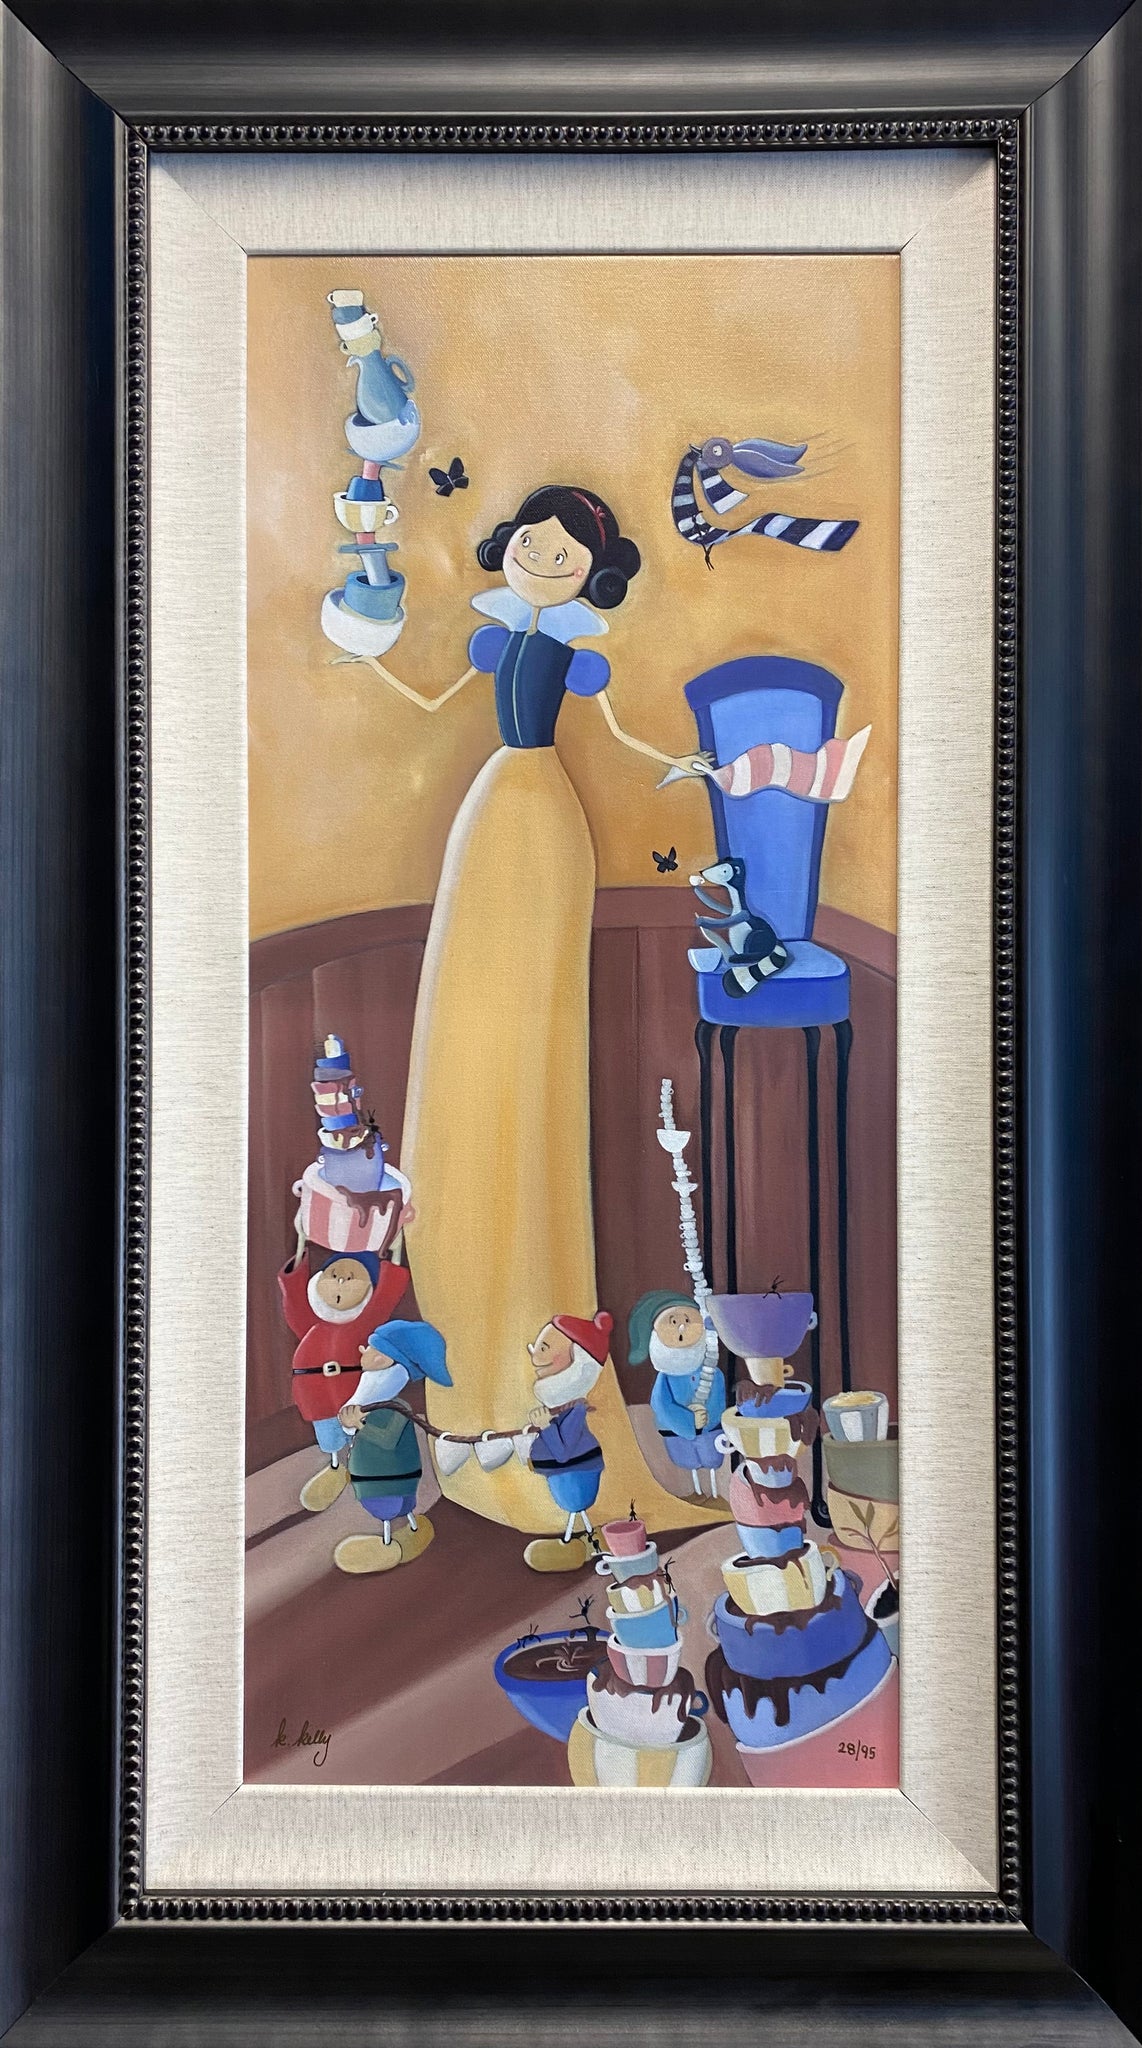 Cleaning Up by Katie Kelly inspired by Snow White and the Seven Dwarfs